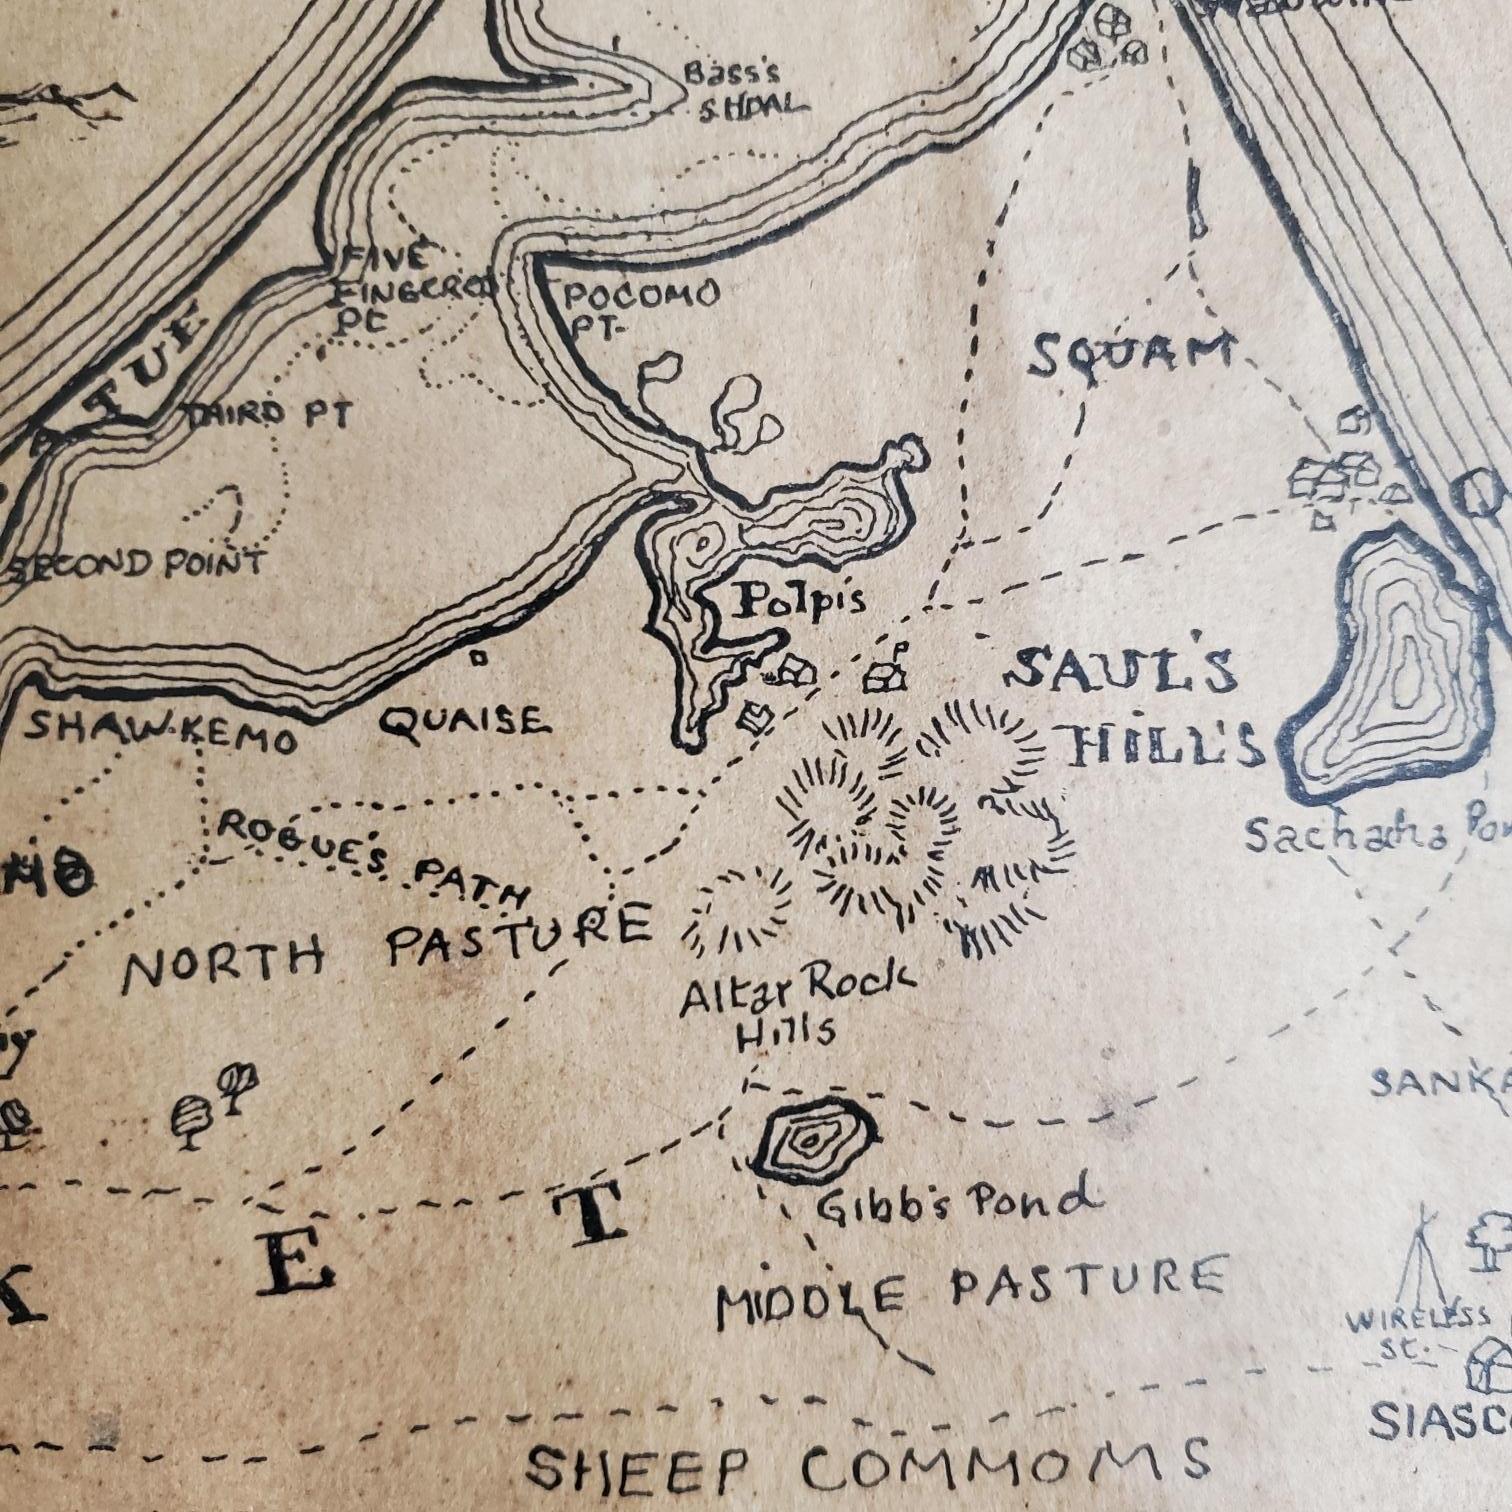 Paper Map of Nantucket by Austin Strong '1881-1952', circa 1925